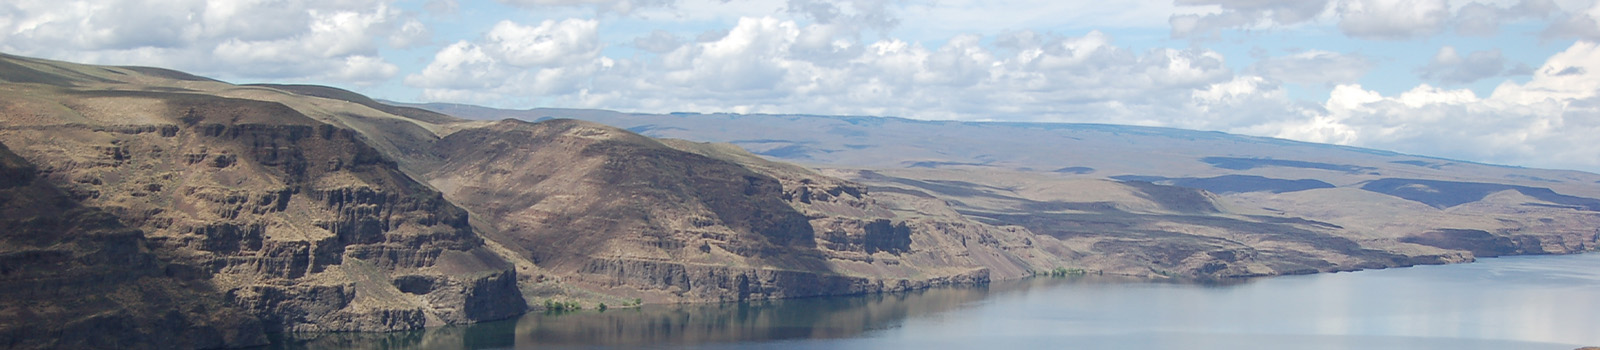 Landscape photo of the Columbia river